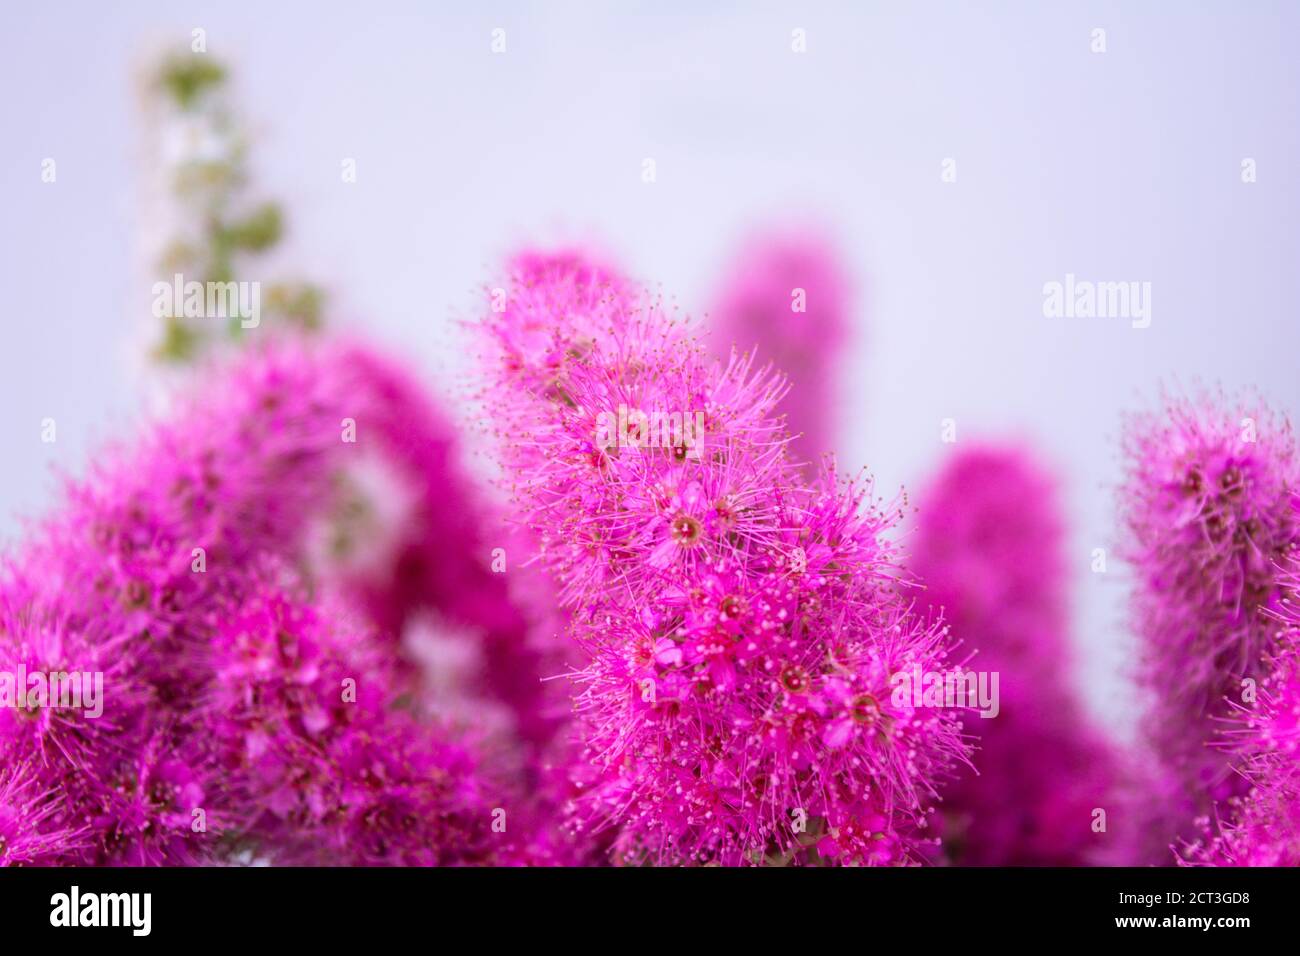 Pink Spirea flowers on bush. Spiraea flowers decorative gardening and forestry management. Blooming plant of Pink Spirea Stock Photo